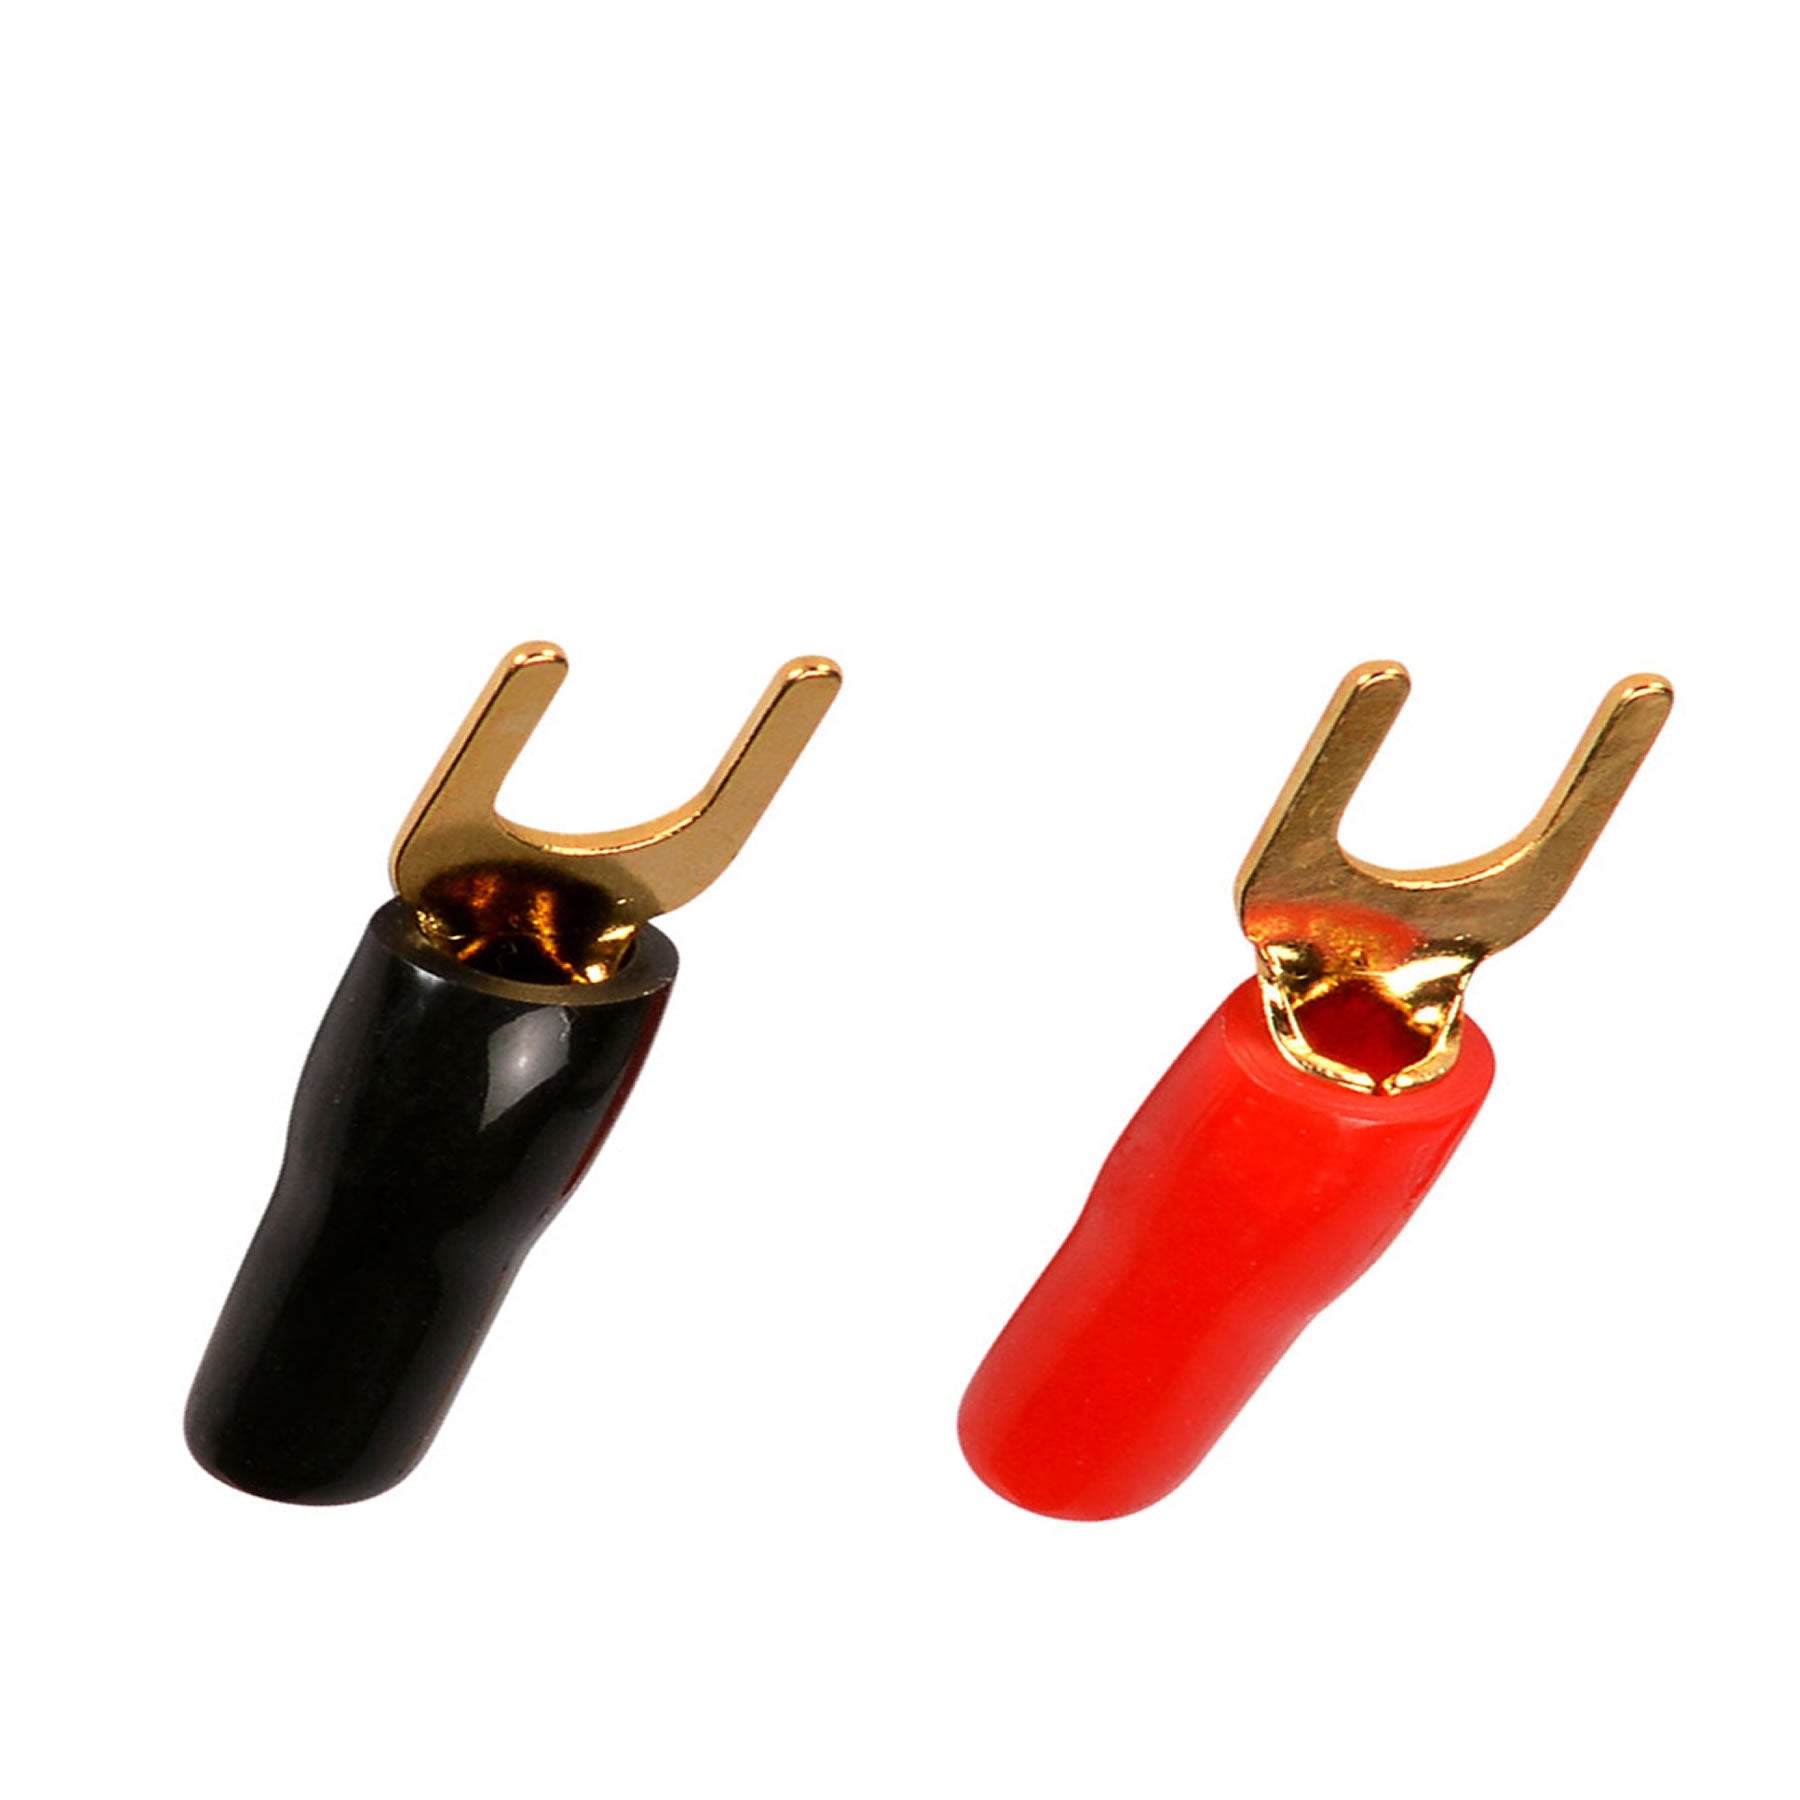 86-0001-00 Insulated Wire Cable Spade Terminal Connectors Gold For 0 AWG